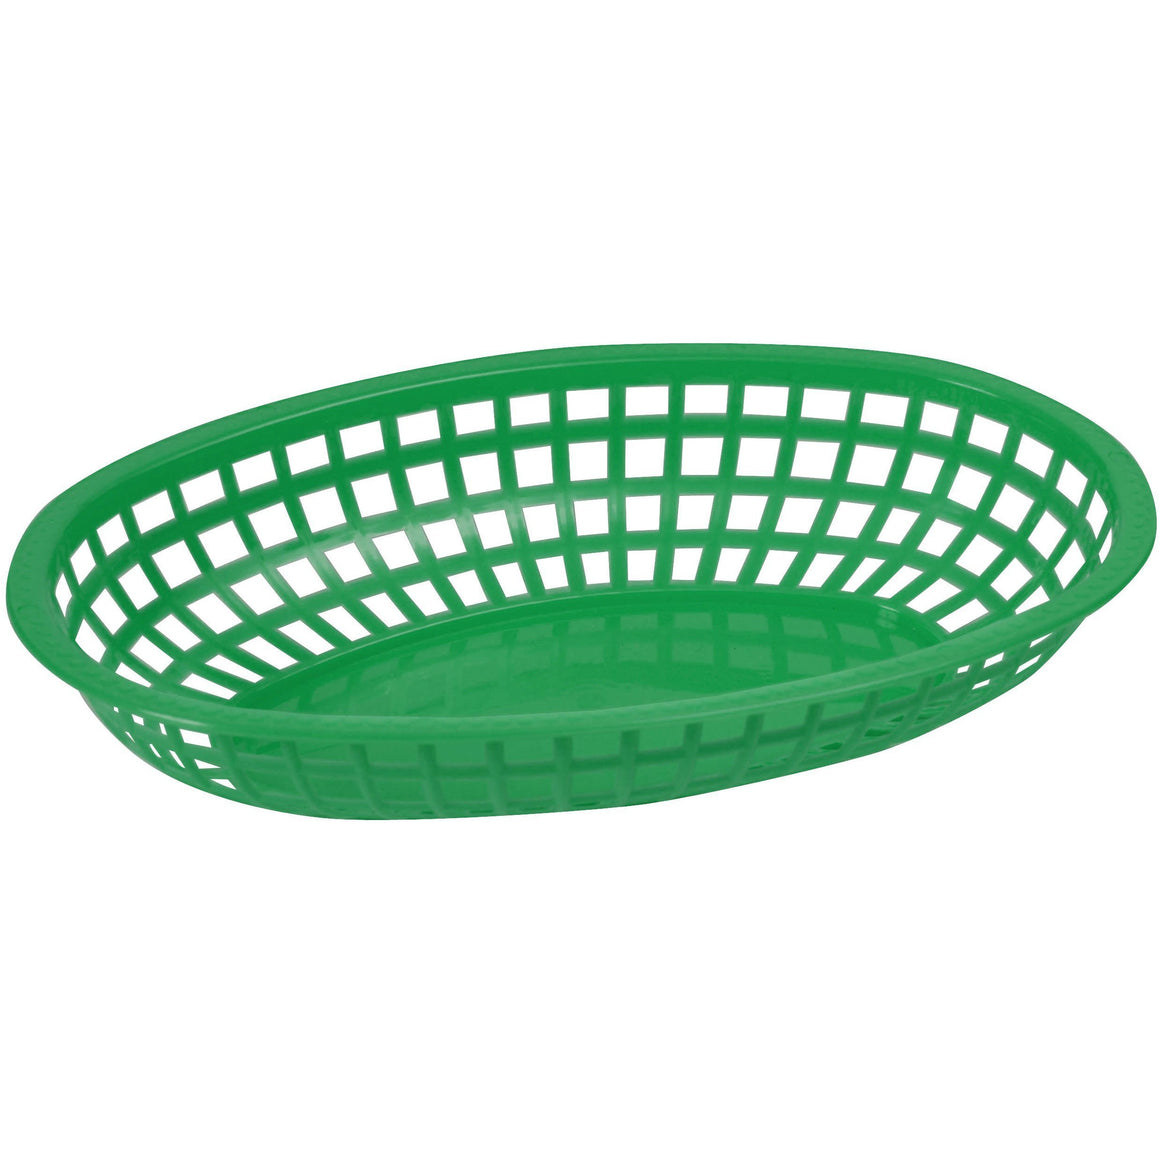 Winco - POB-G - Fast Food Baskets, Oval, 10-1/4" x 6-3/4" x 2", Green - Tabletop - Maltese & Co New and Used  restaurant Equipment 